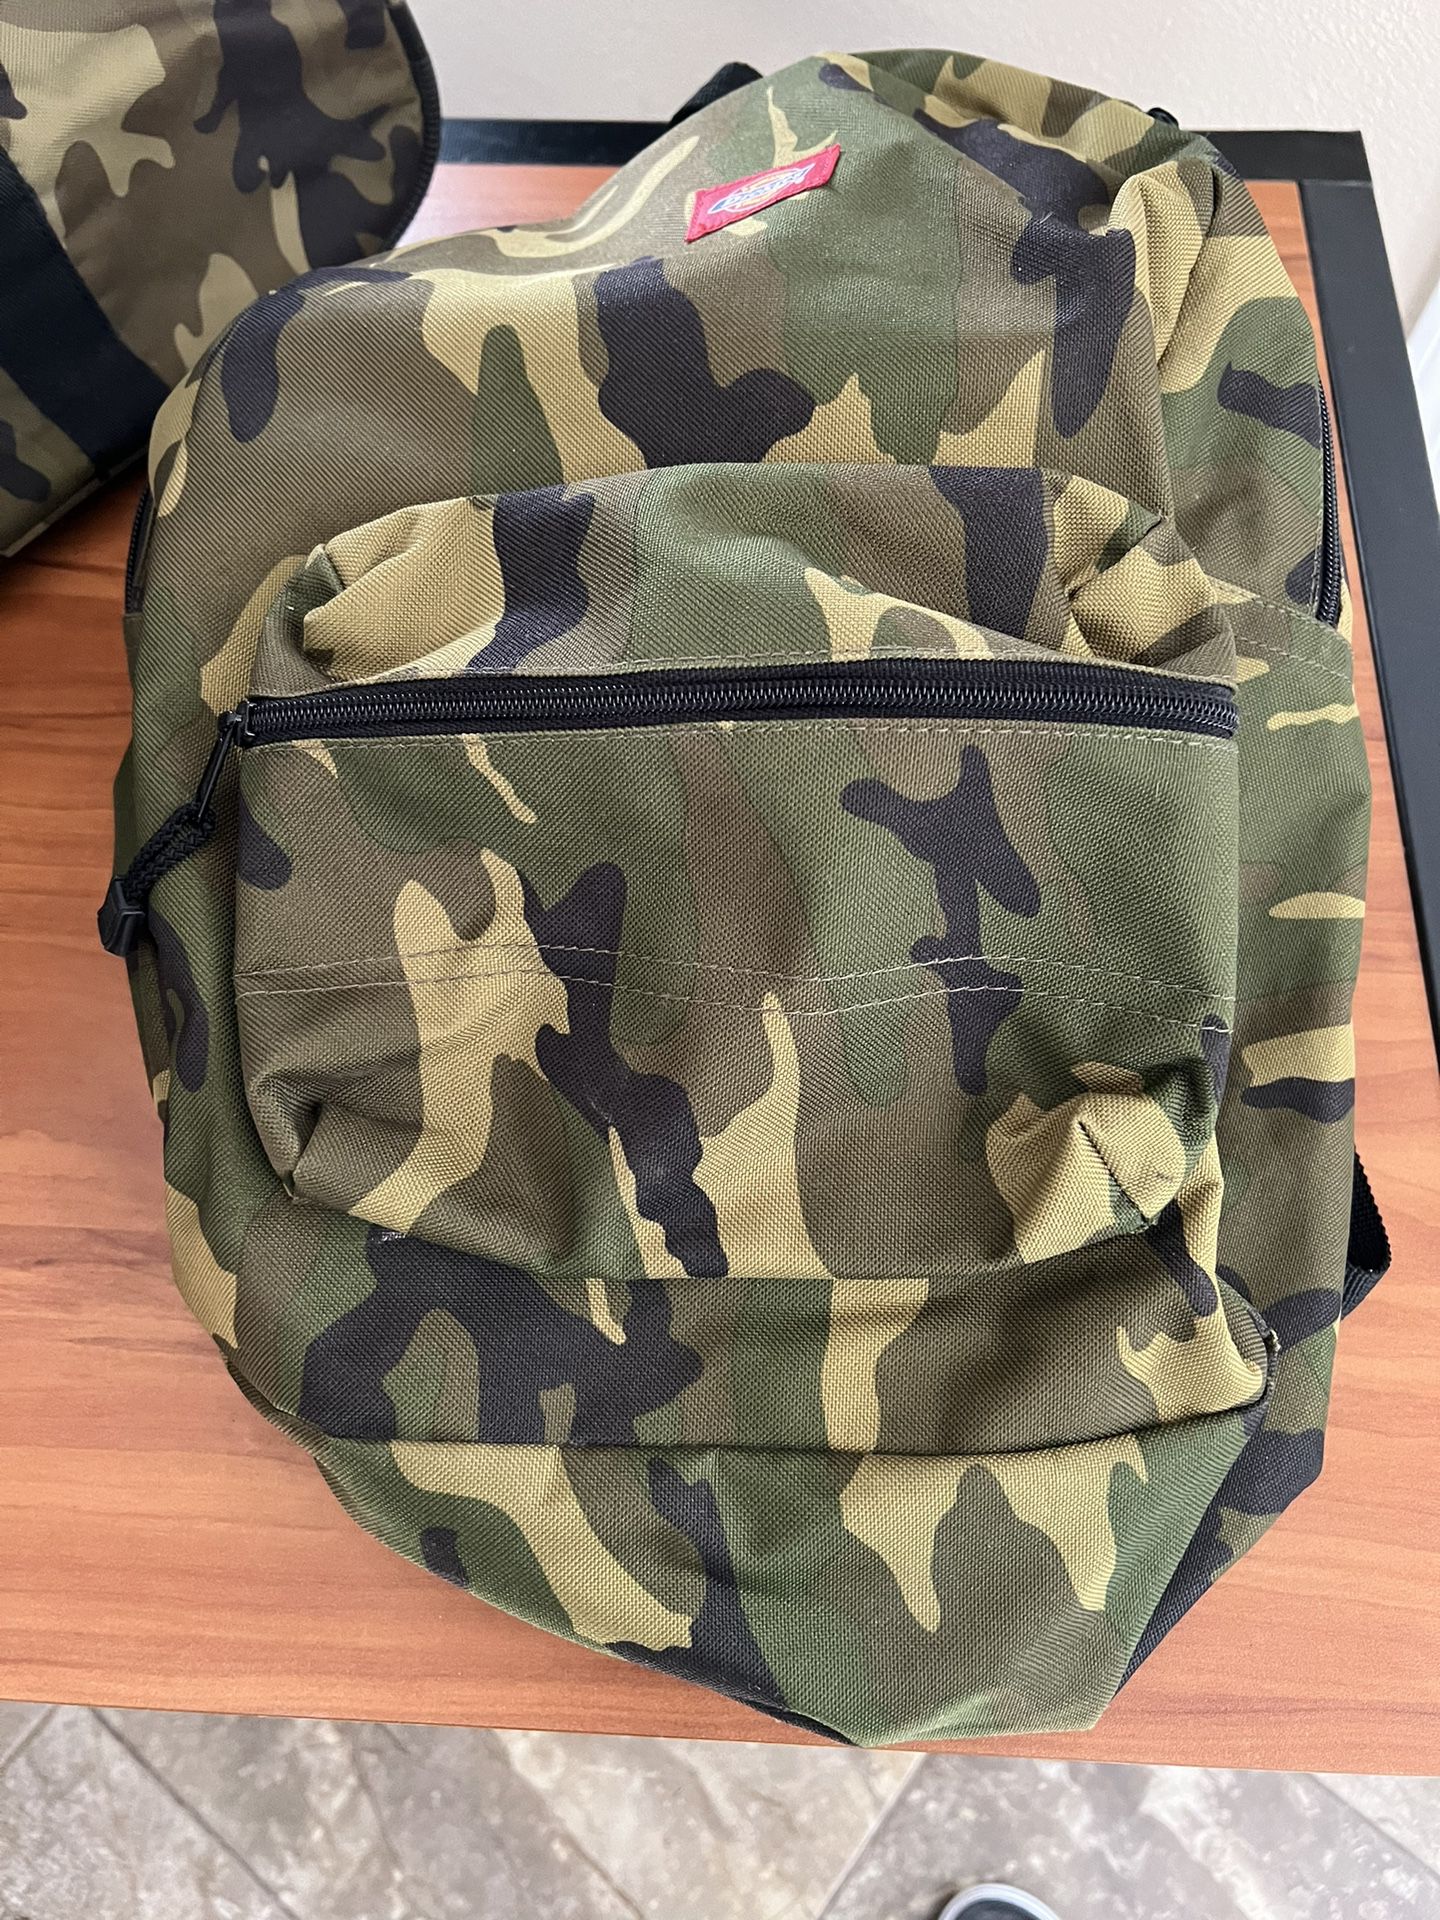 Dickies Camo Backpack and Rolling Luggage $50obo